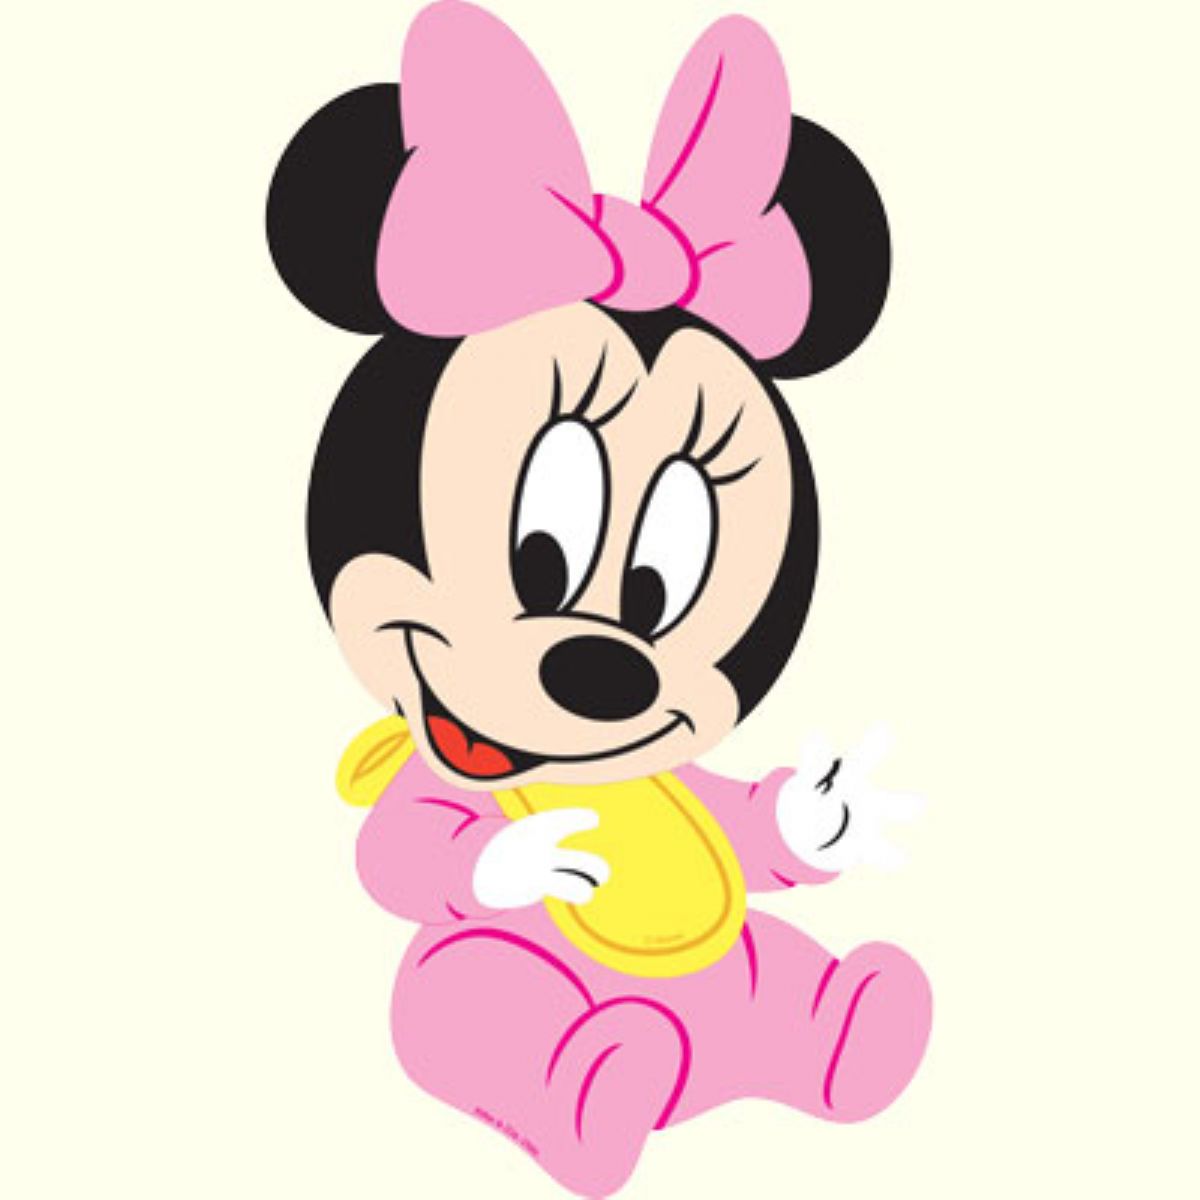 Baby Minnie Mouse Png HD Wallpaper, Background Image